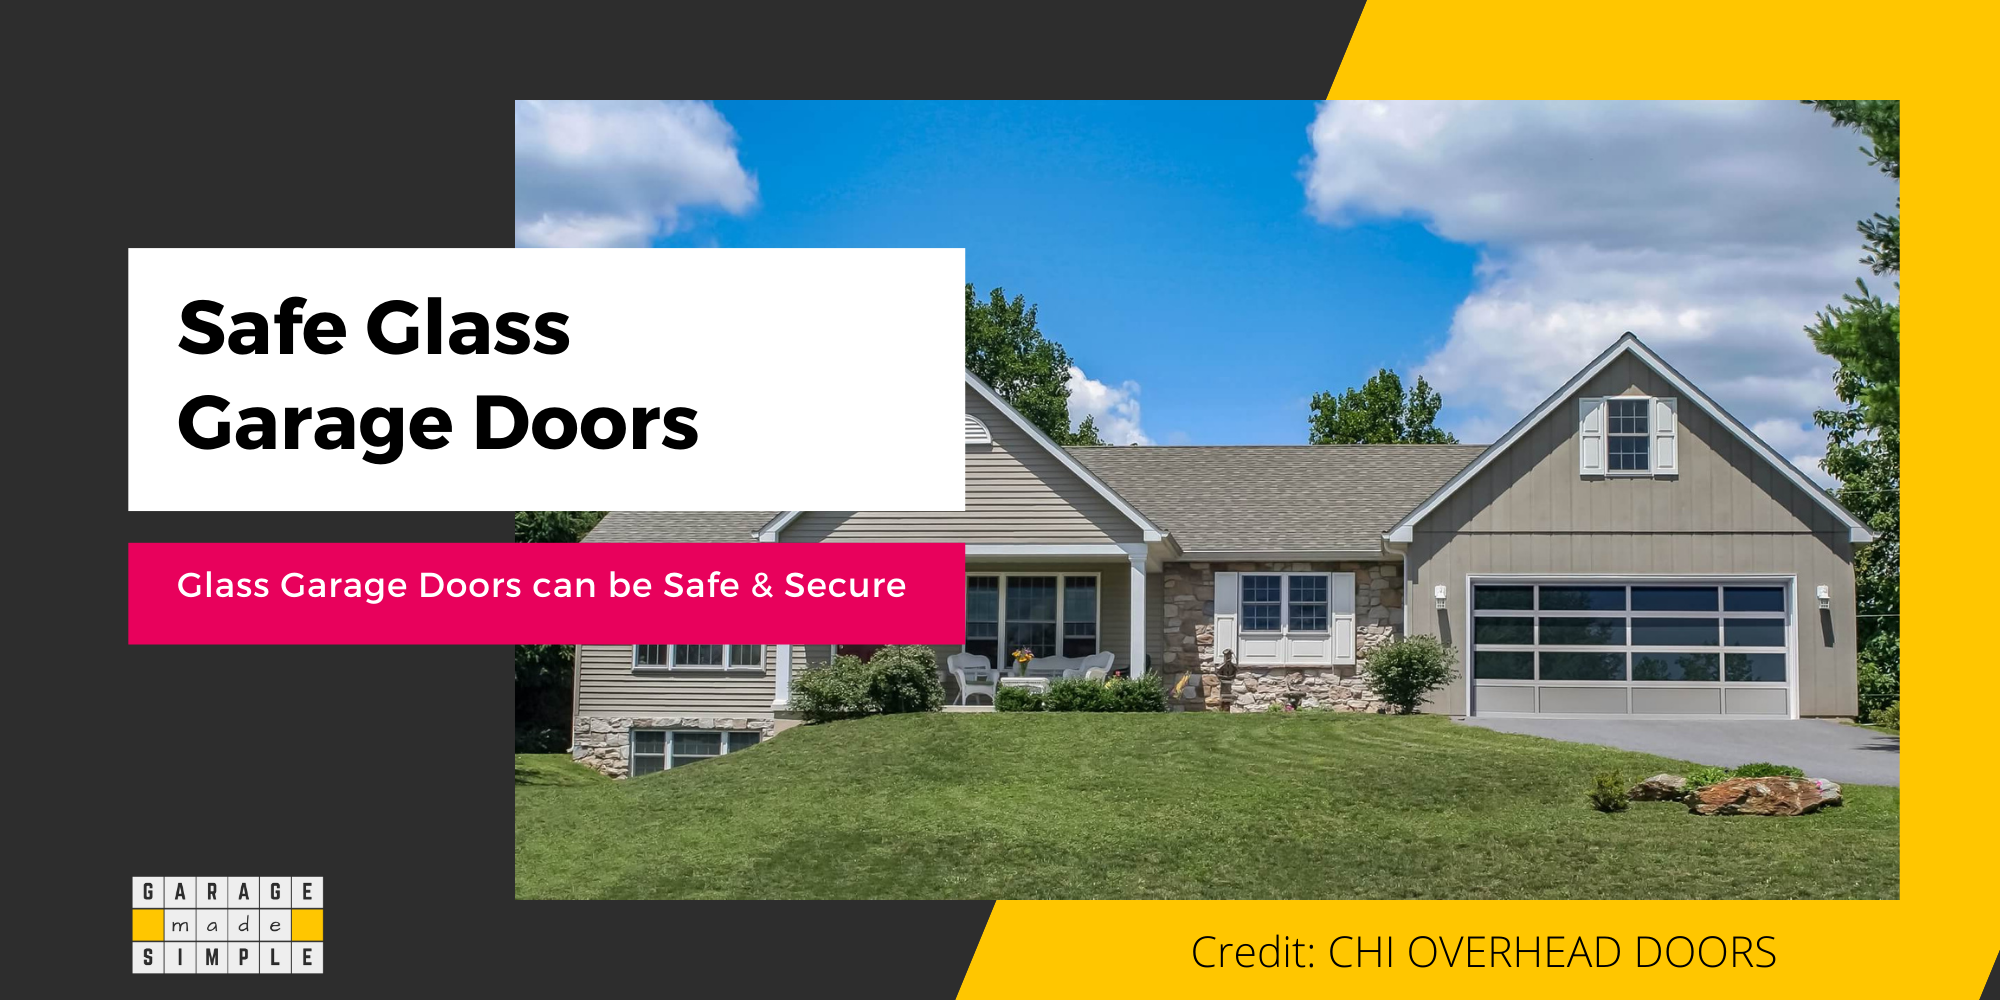 How To Make Sure Glass Panel Garage Doors Are Safe?